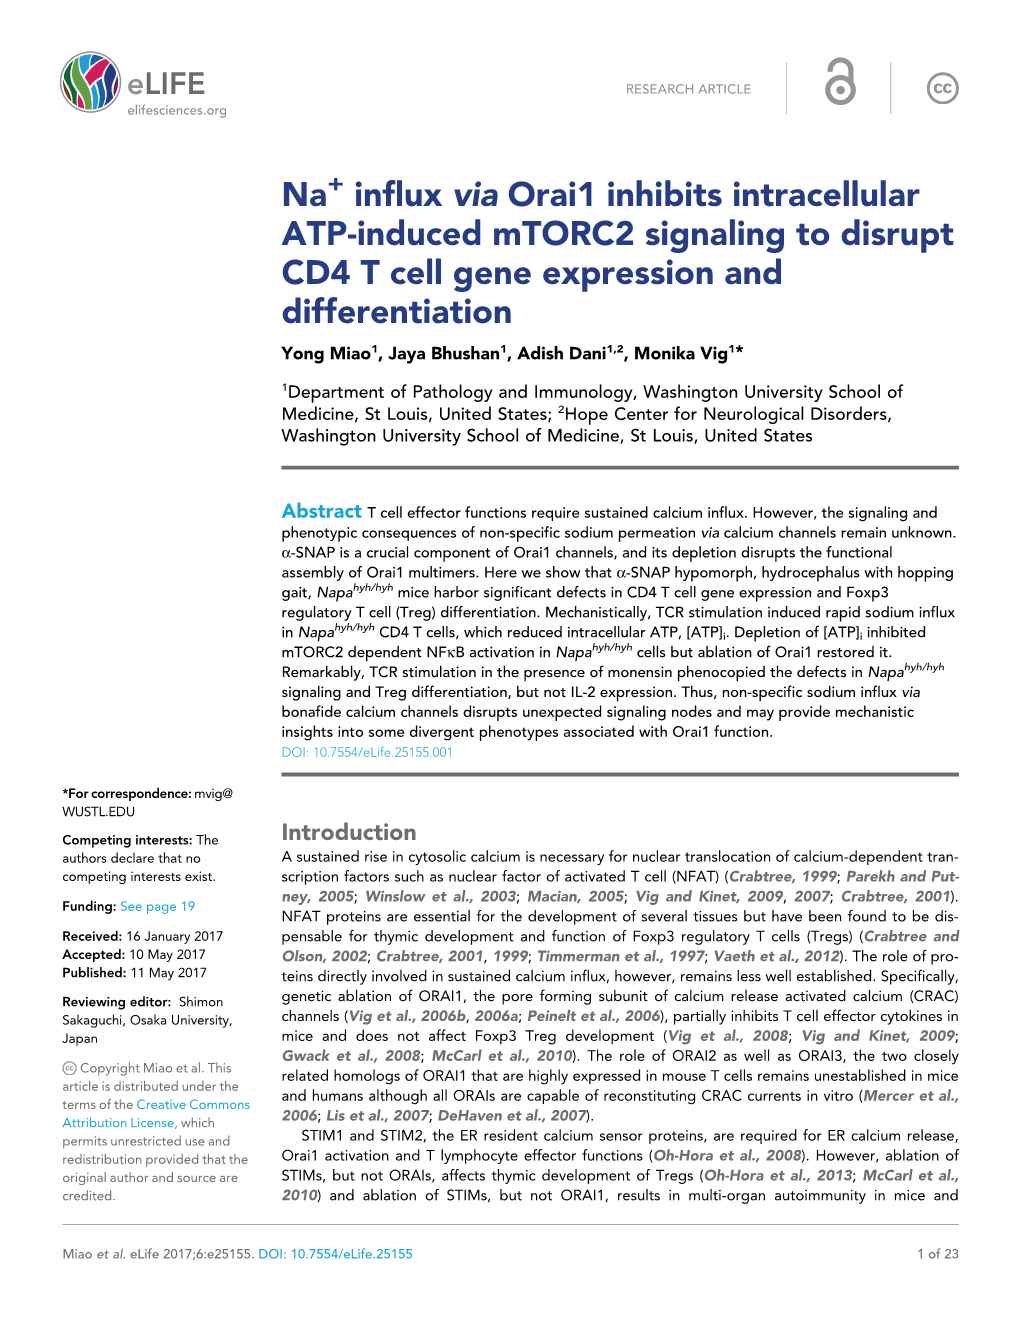 Na Influx Via Orai1 Inhibits Intracellular ATP-Induced Mtorc2 Signaling